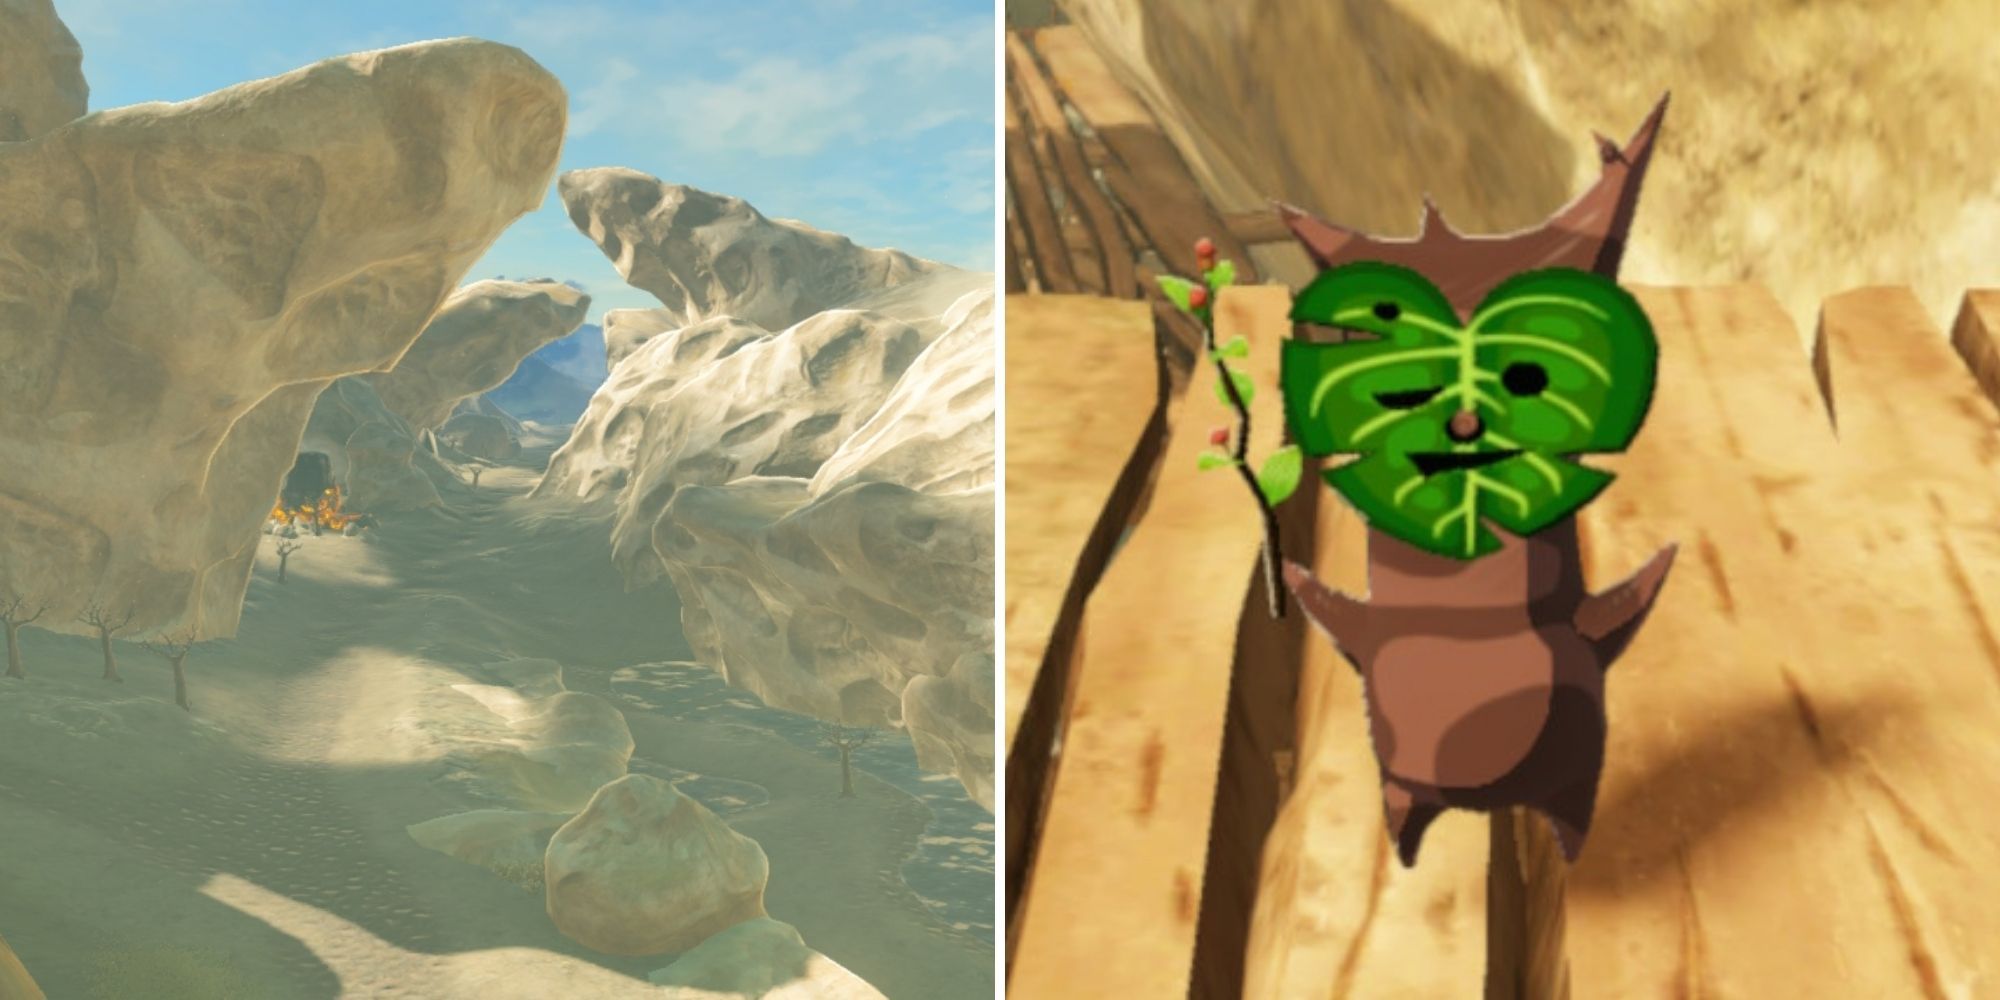 Hyrule Warriors Age of Calamity - The Breach of Demise on Right, Korok on right